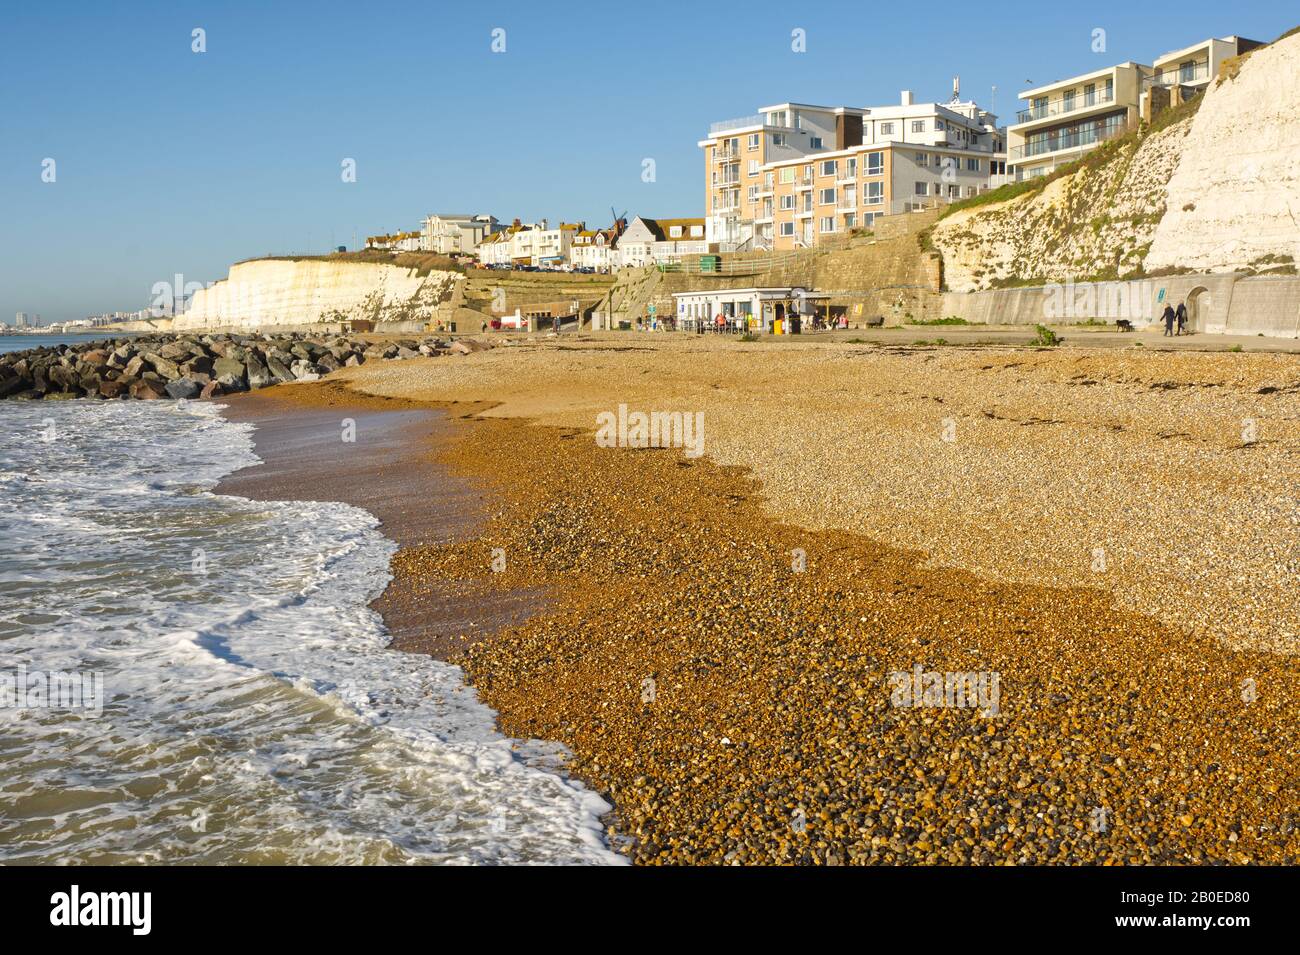 Brighton, England - November 28, 2019: Shingle beach with cafe on promenade at Rottingdean near Brighton in East Sussex, England. With people. Stock Photo